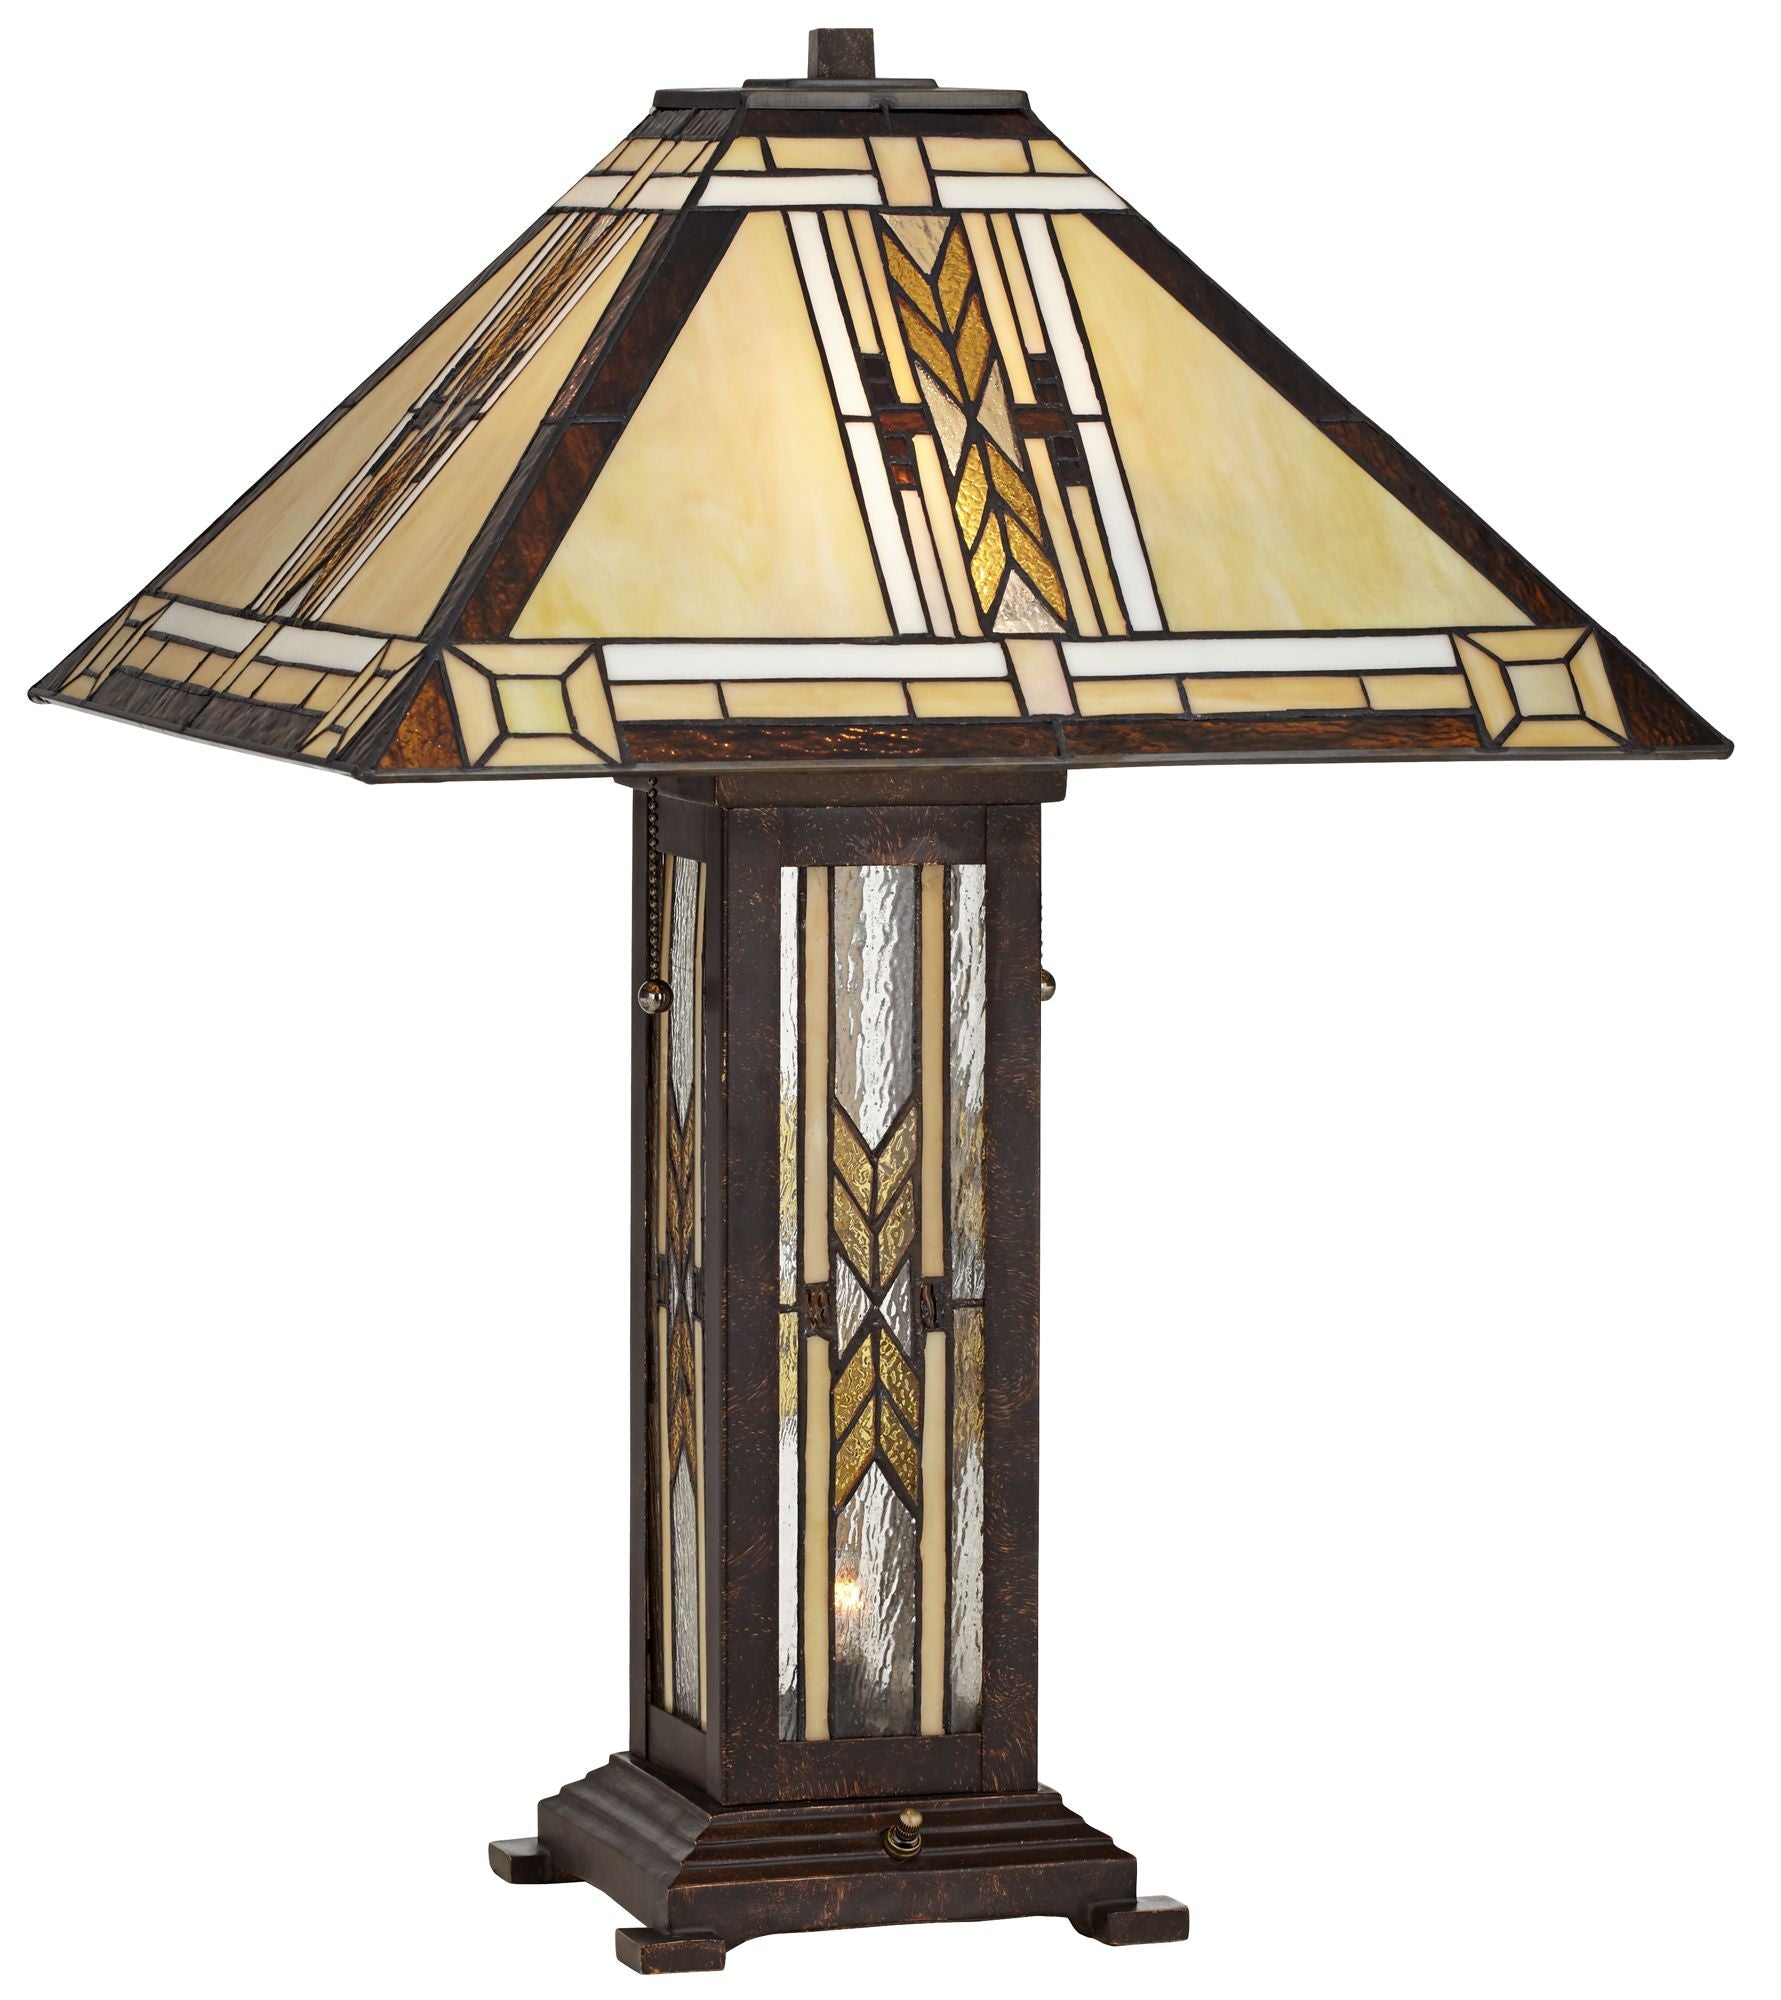 Franklin Iron Works  Style Table Lamp with Nightlight Mission 25.5" High Bronze Stained Glass for Living Room Family Bedroom (Color May Vary)